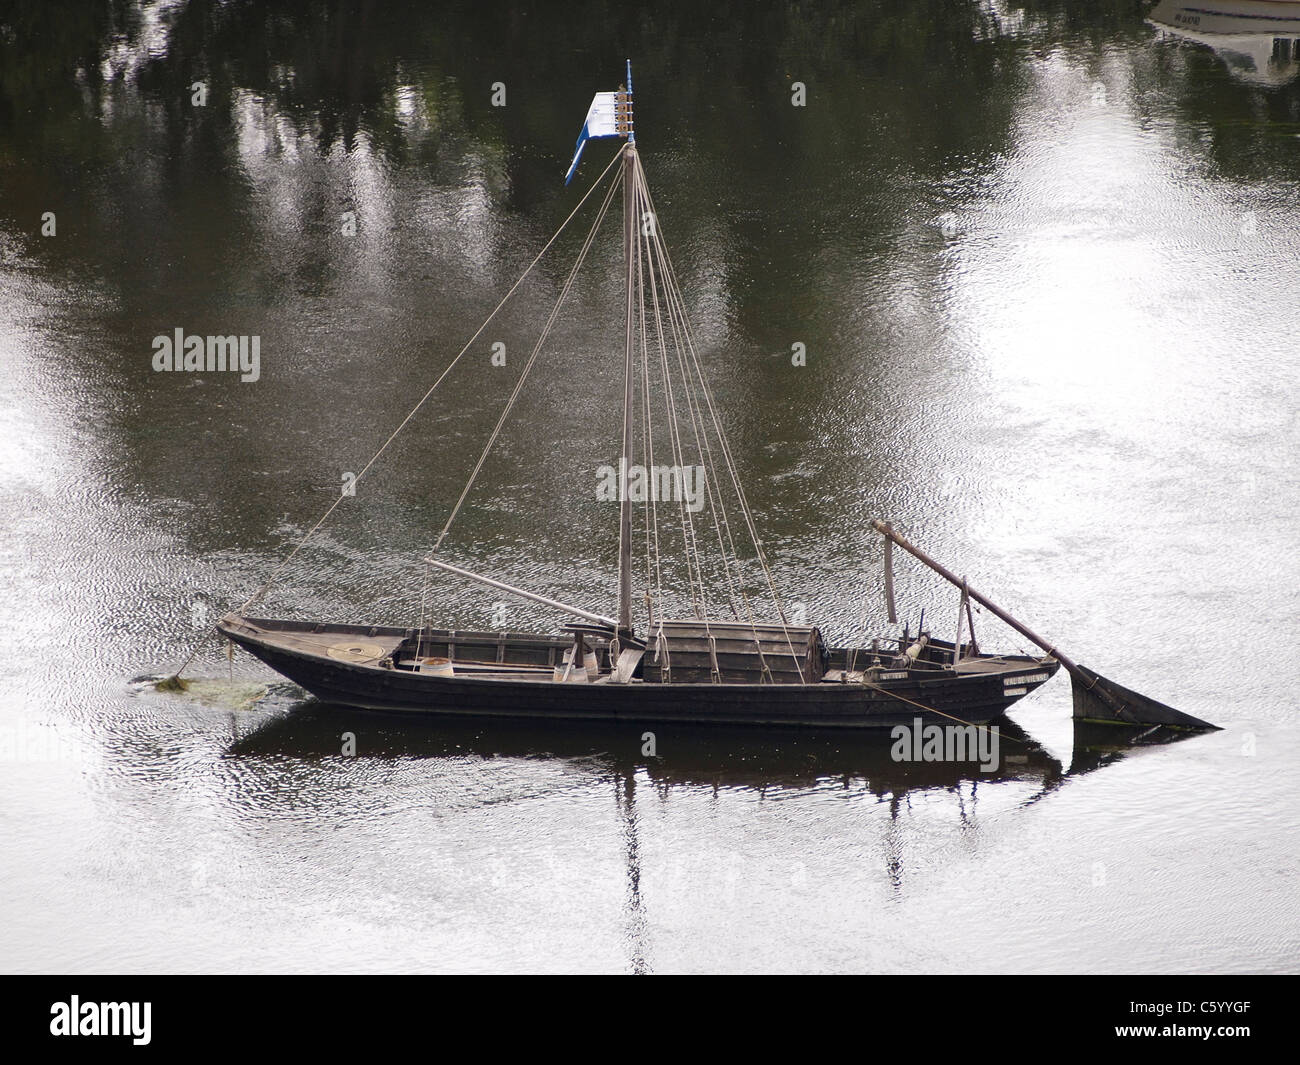 Typical traditional wooden Loire boat anchored in the river near Chinon, Loire valley, France Stock Photo